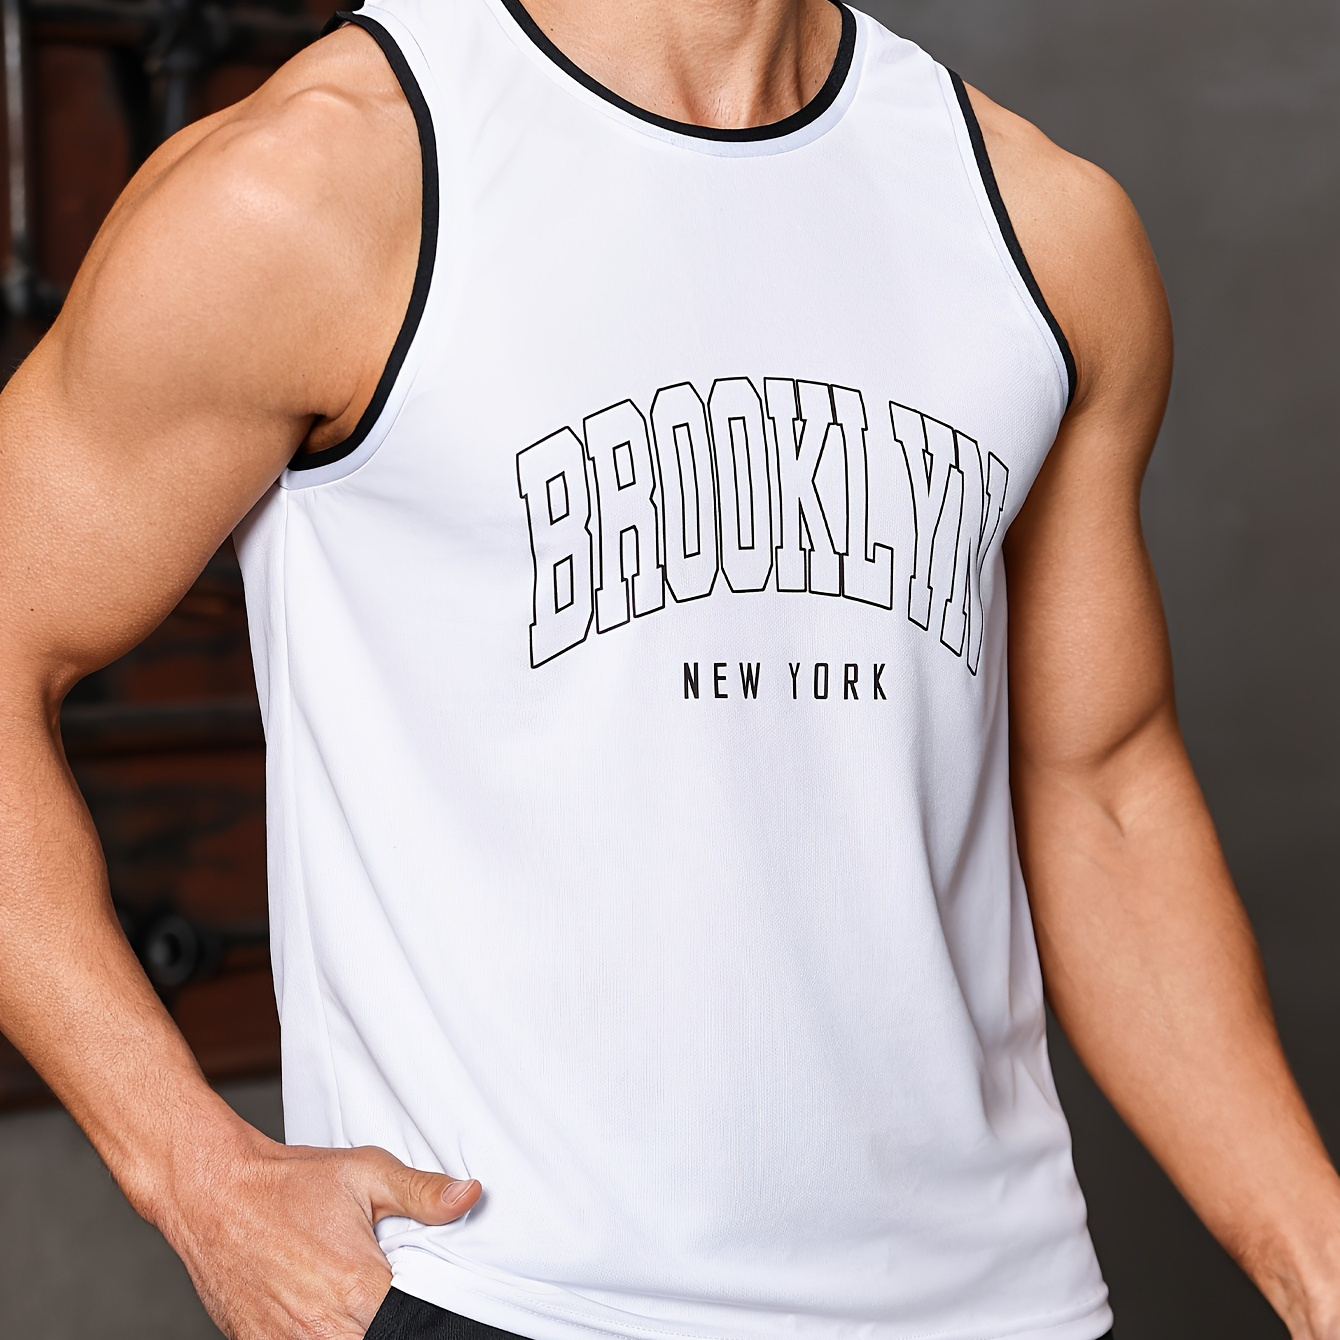 

Brooklyn New York Print Casual Breathable Comfy Sleeveless Tank Tops For Men, Men's Summer Clothes Outfits, Men's Undershirts Tops